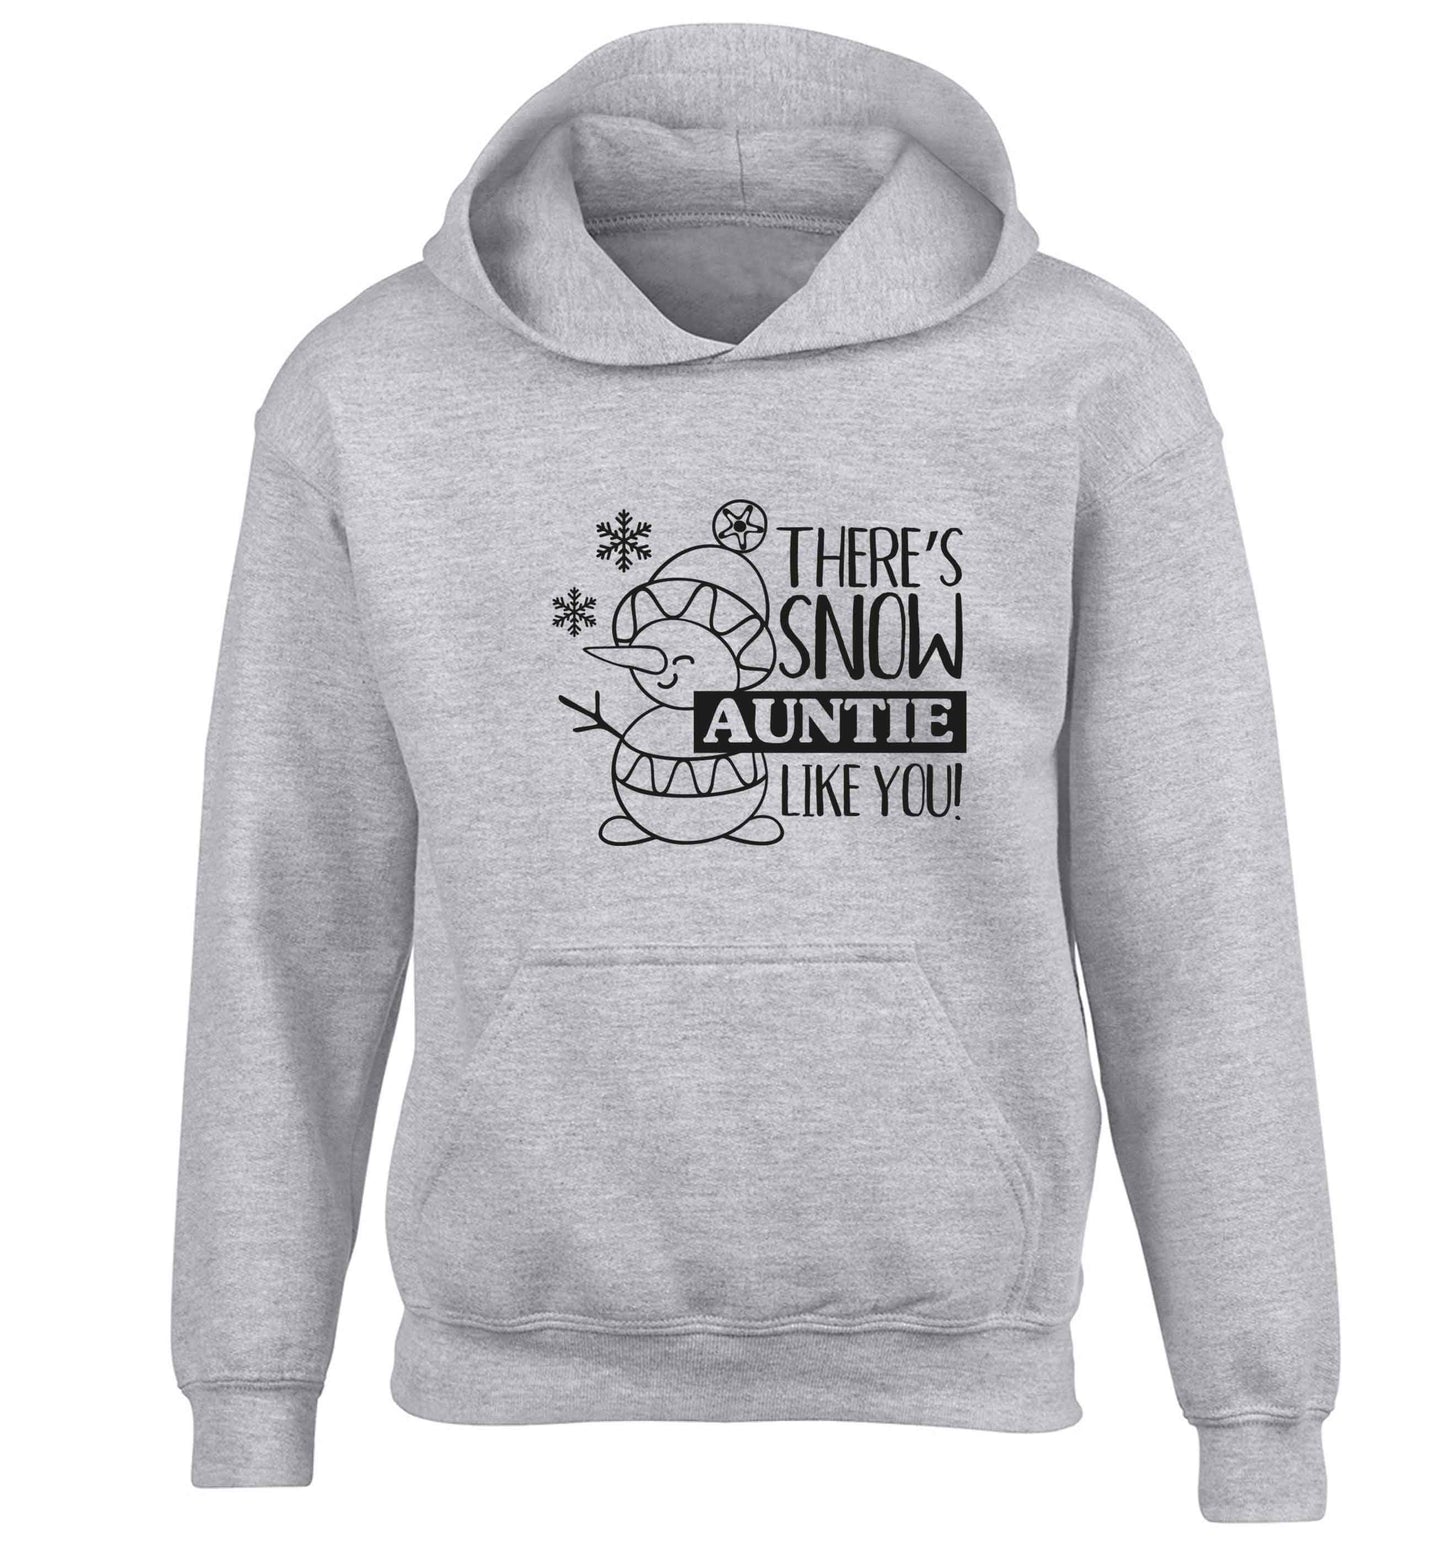 There's snow auntie like you children's grey hoodie 12-13 Years